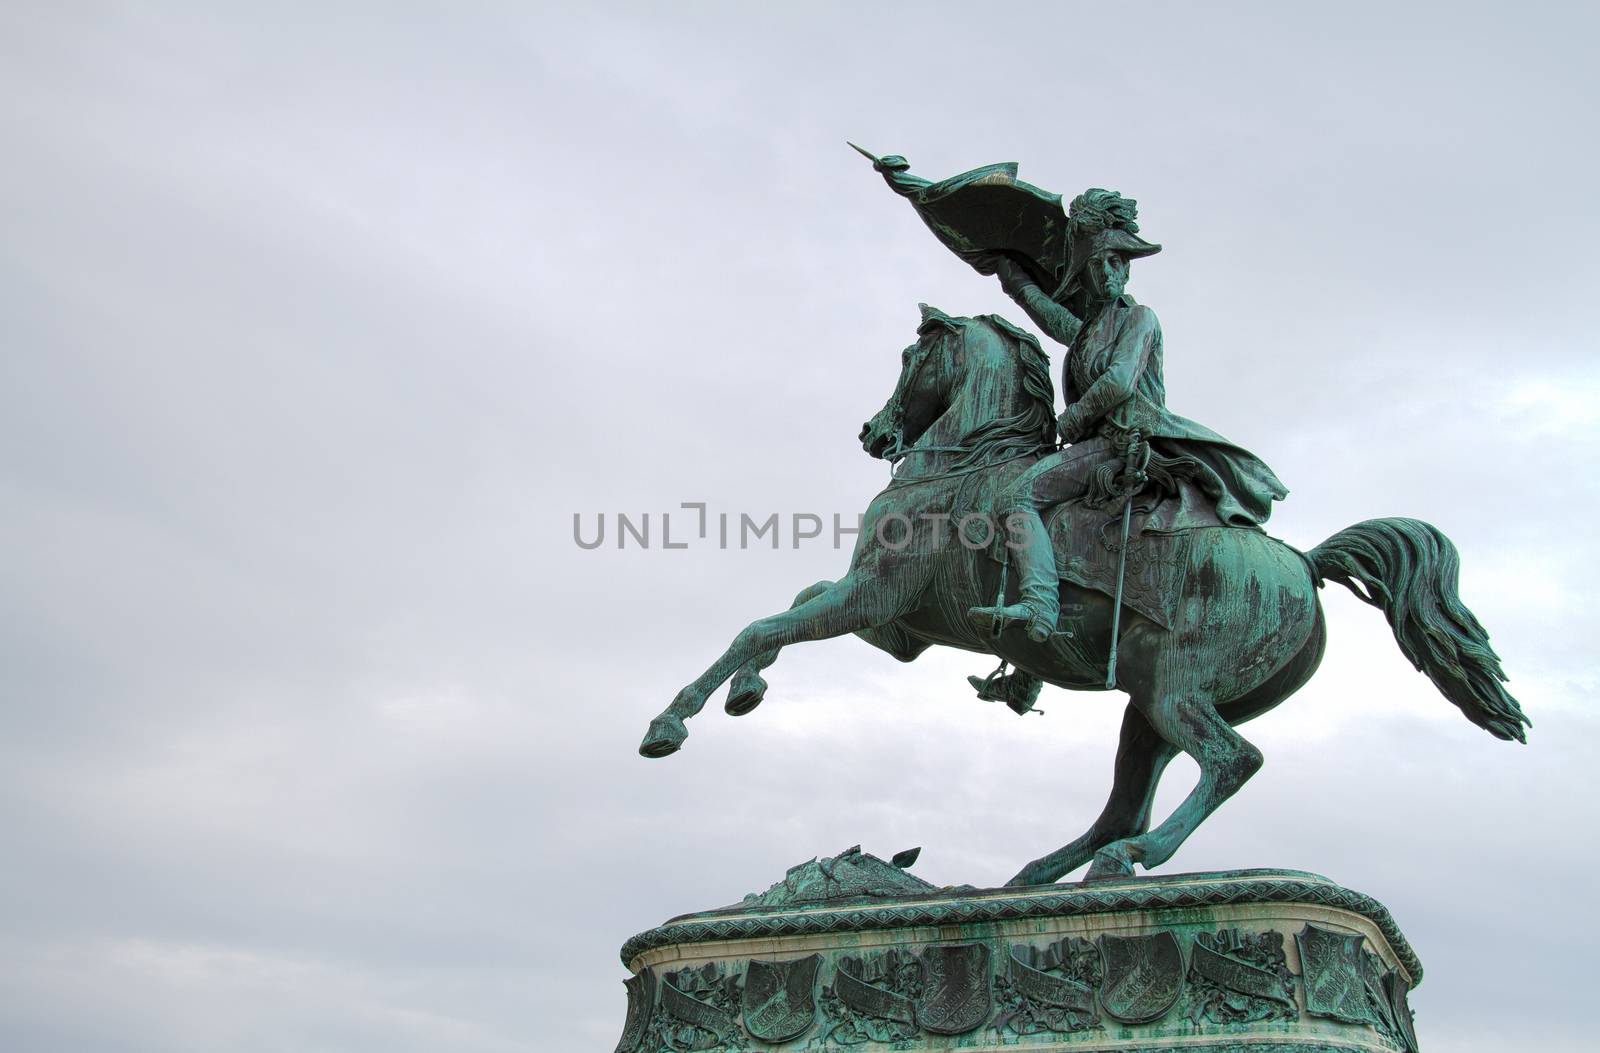 Statue of Archduke Charles by Aarstudio